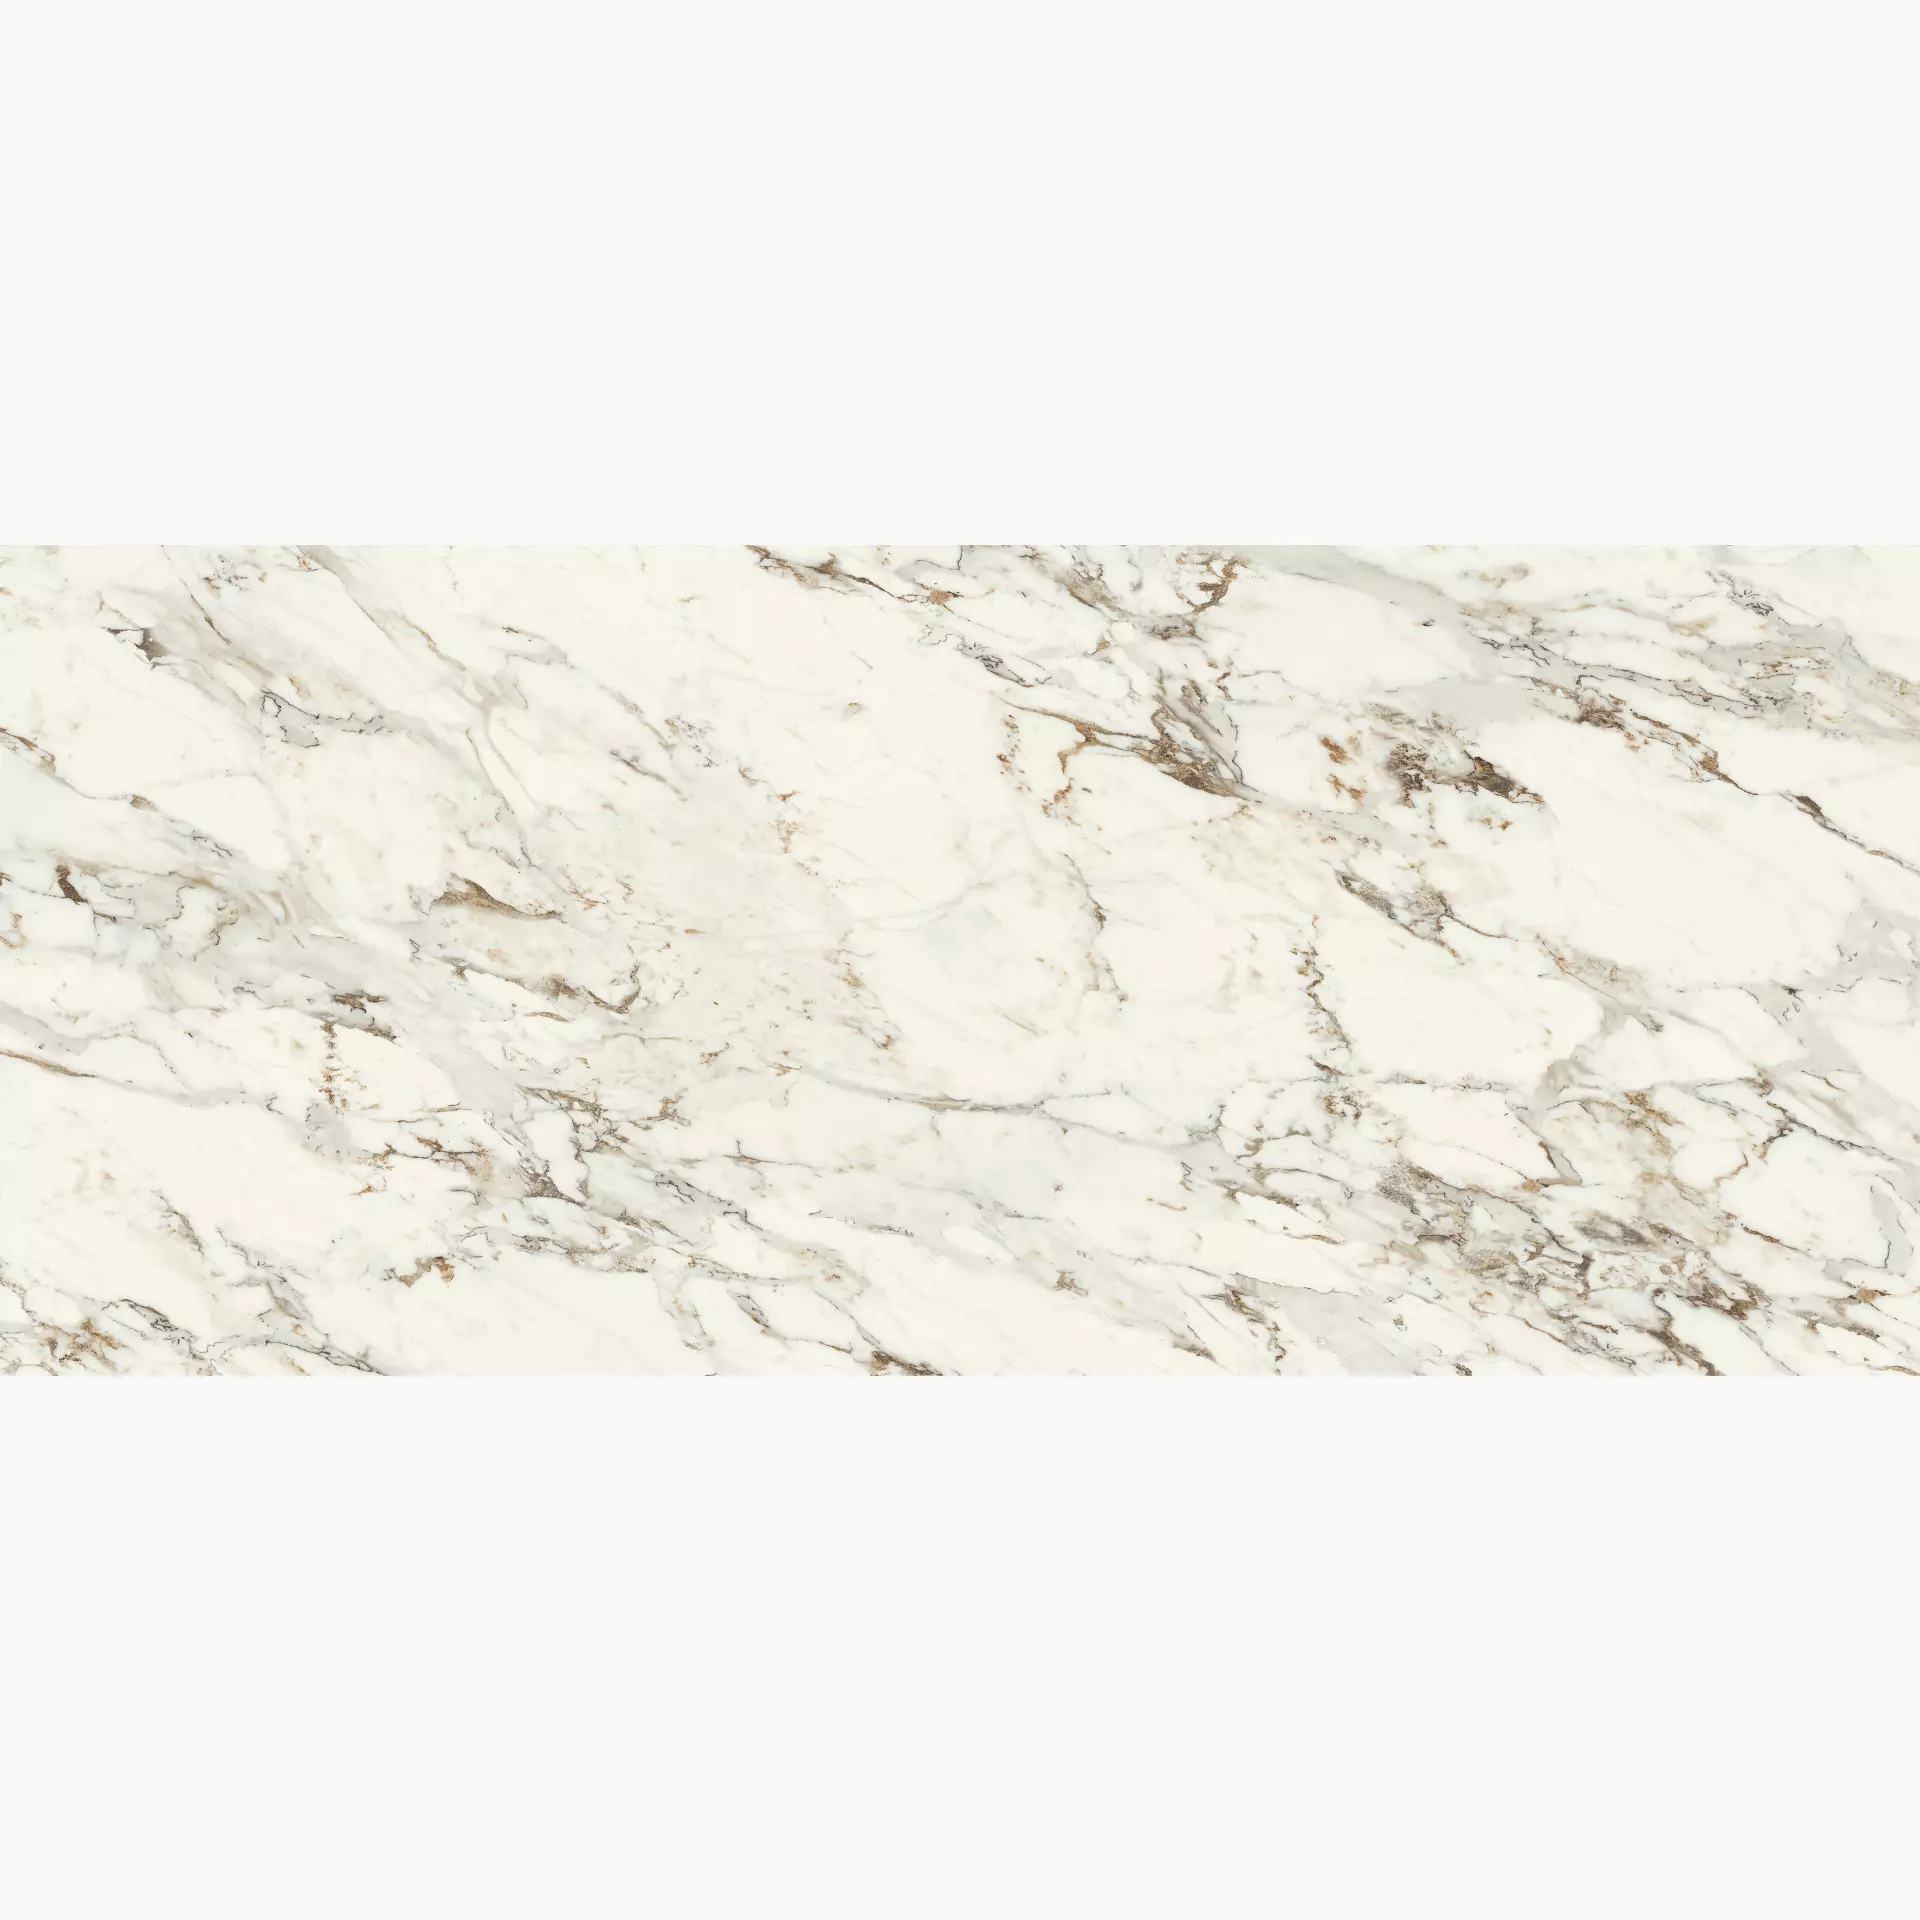 Supergres Purity Of Marble Brecce Capraia Lux PCX8 120x278cm rectified 6mm